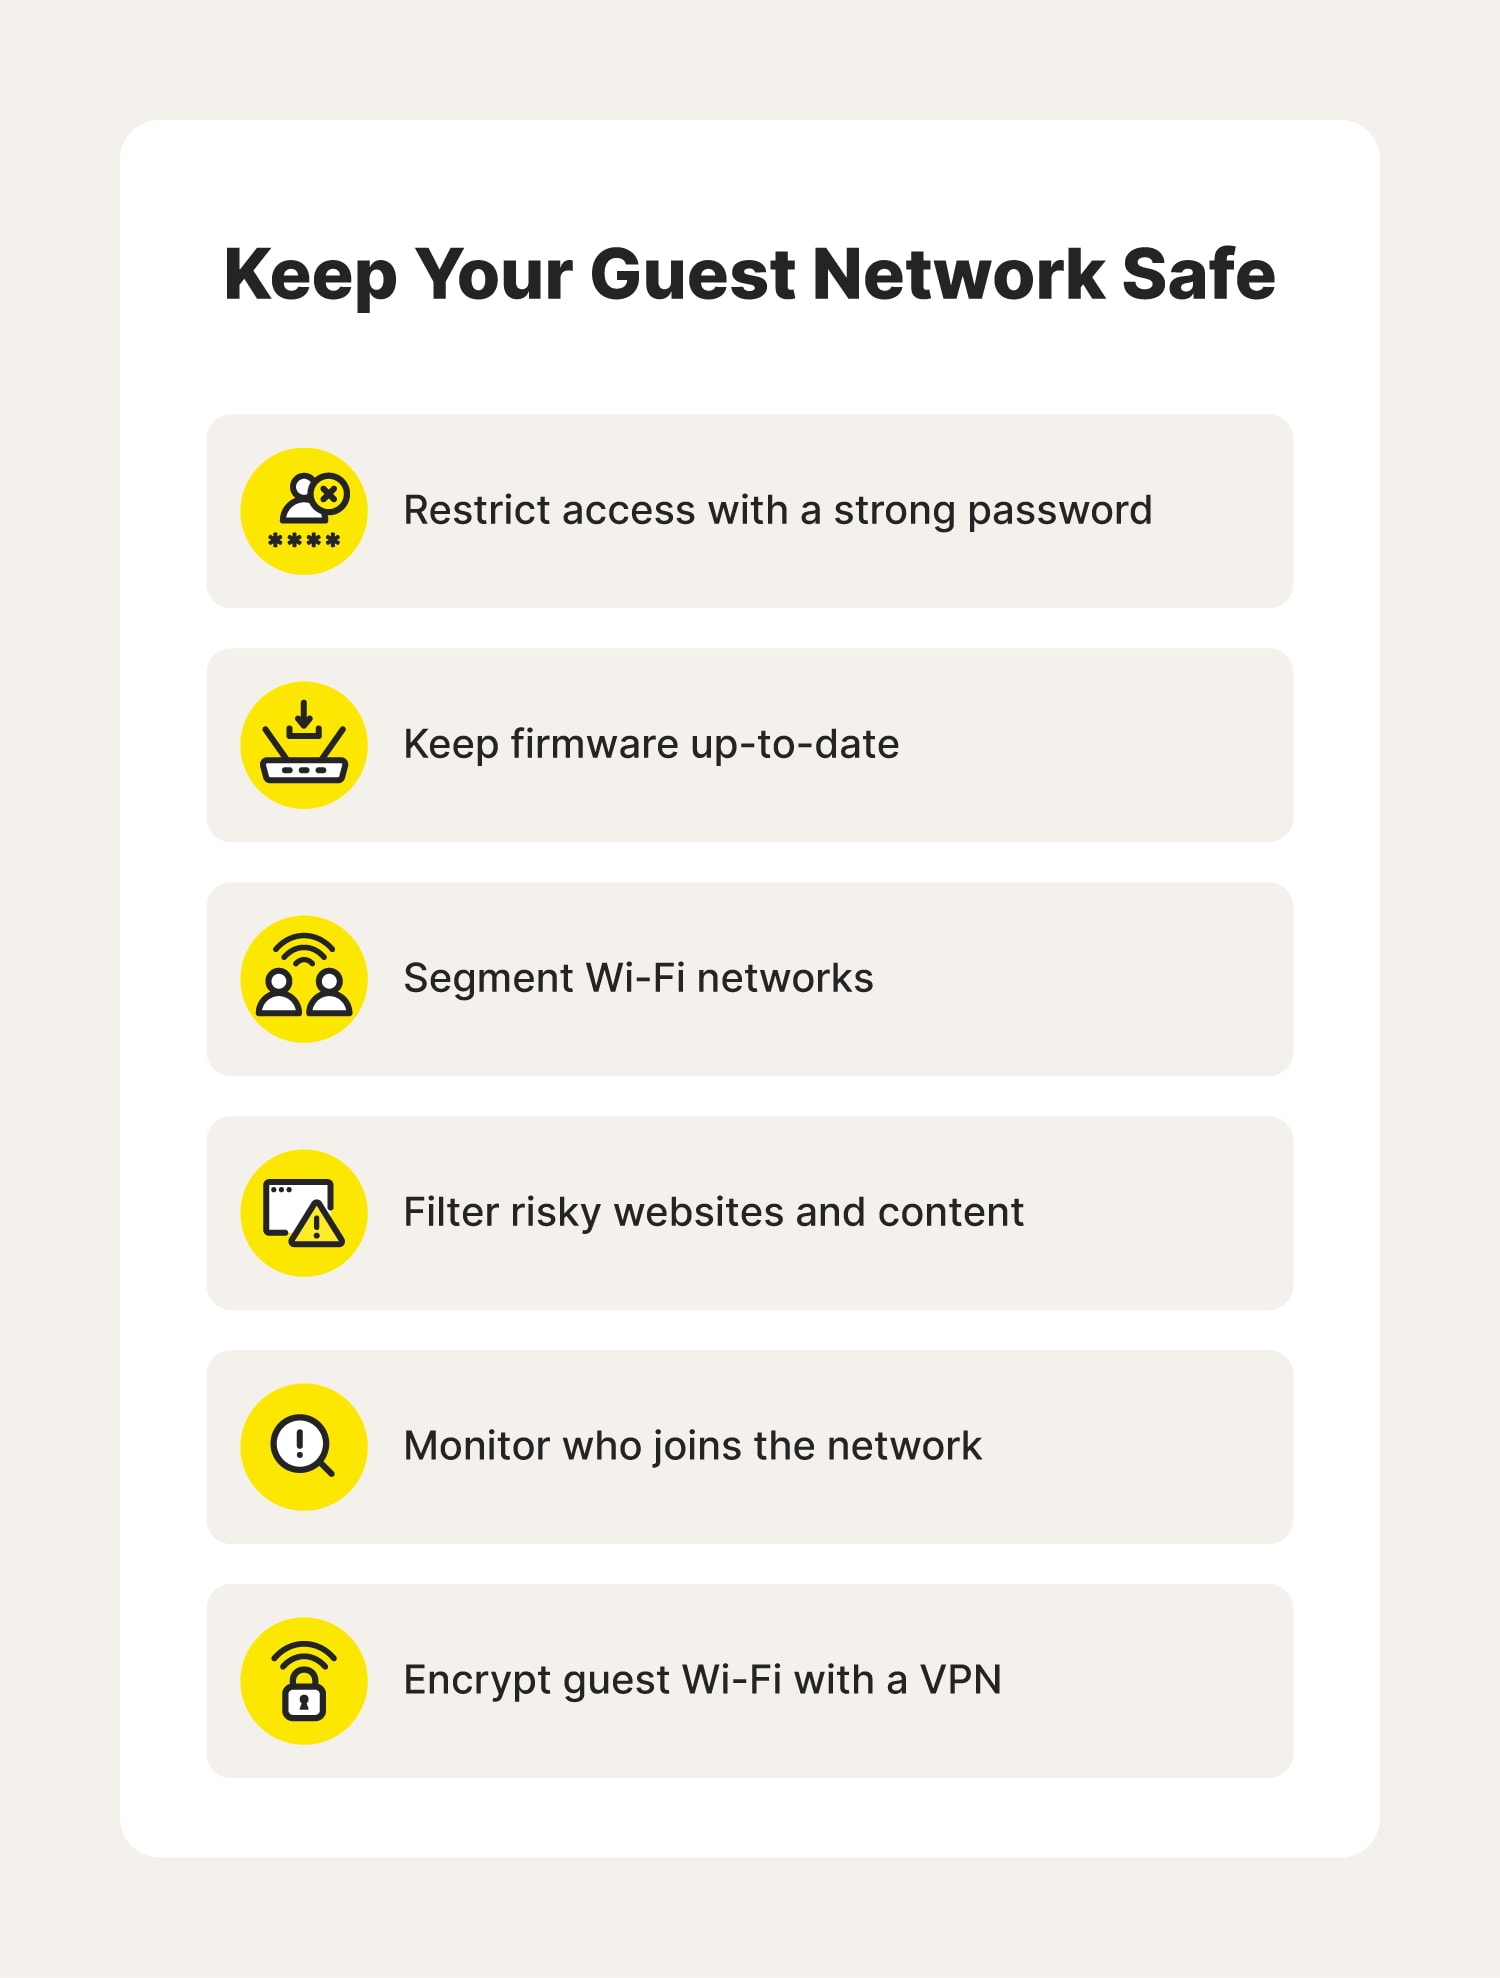 Strategies to keep guest Wi-Fi networks safe from hackers.